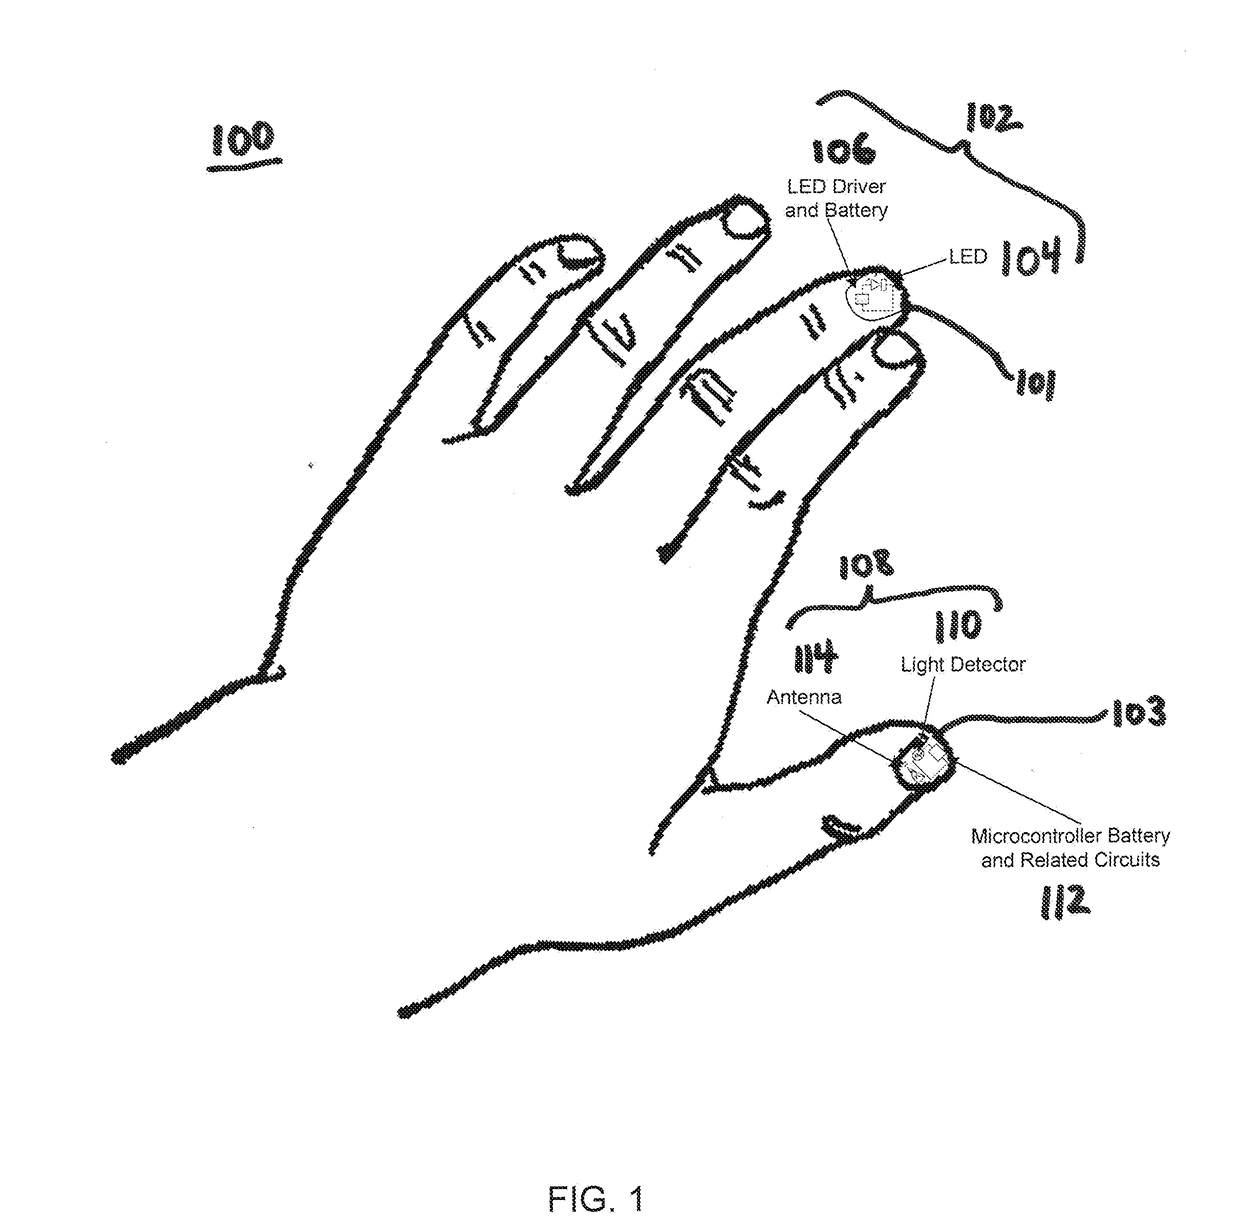 Systems, apparatuses and methods for controlling prosthetic devices by gestures and other modalities